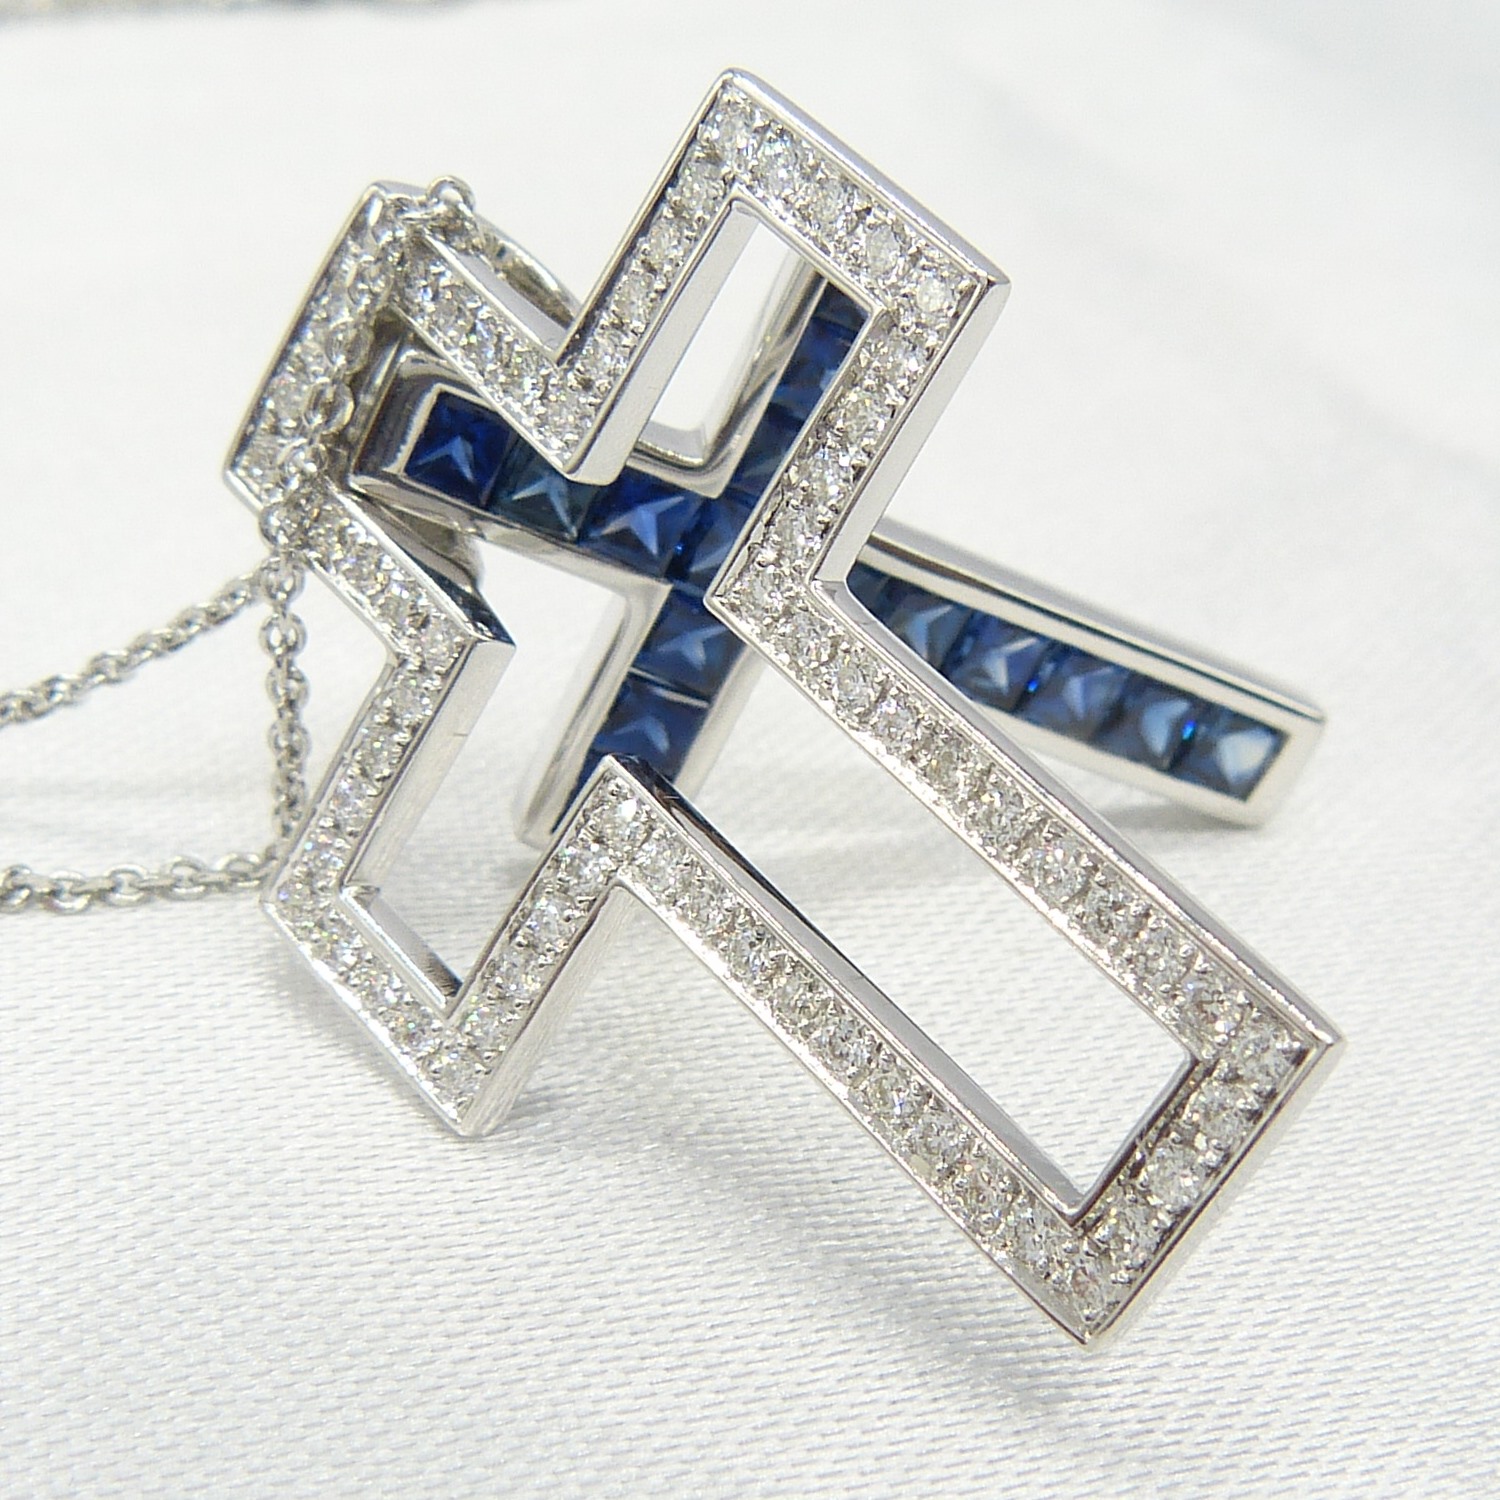 18ct white gold two-piece sapphire and diamond cross pendant with chain, boxed - Image 7 of 10